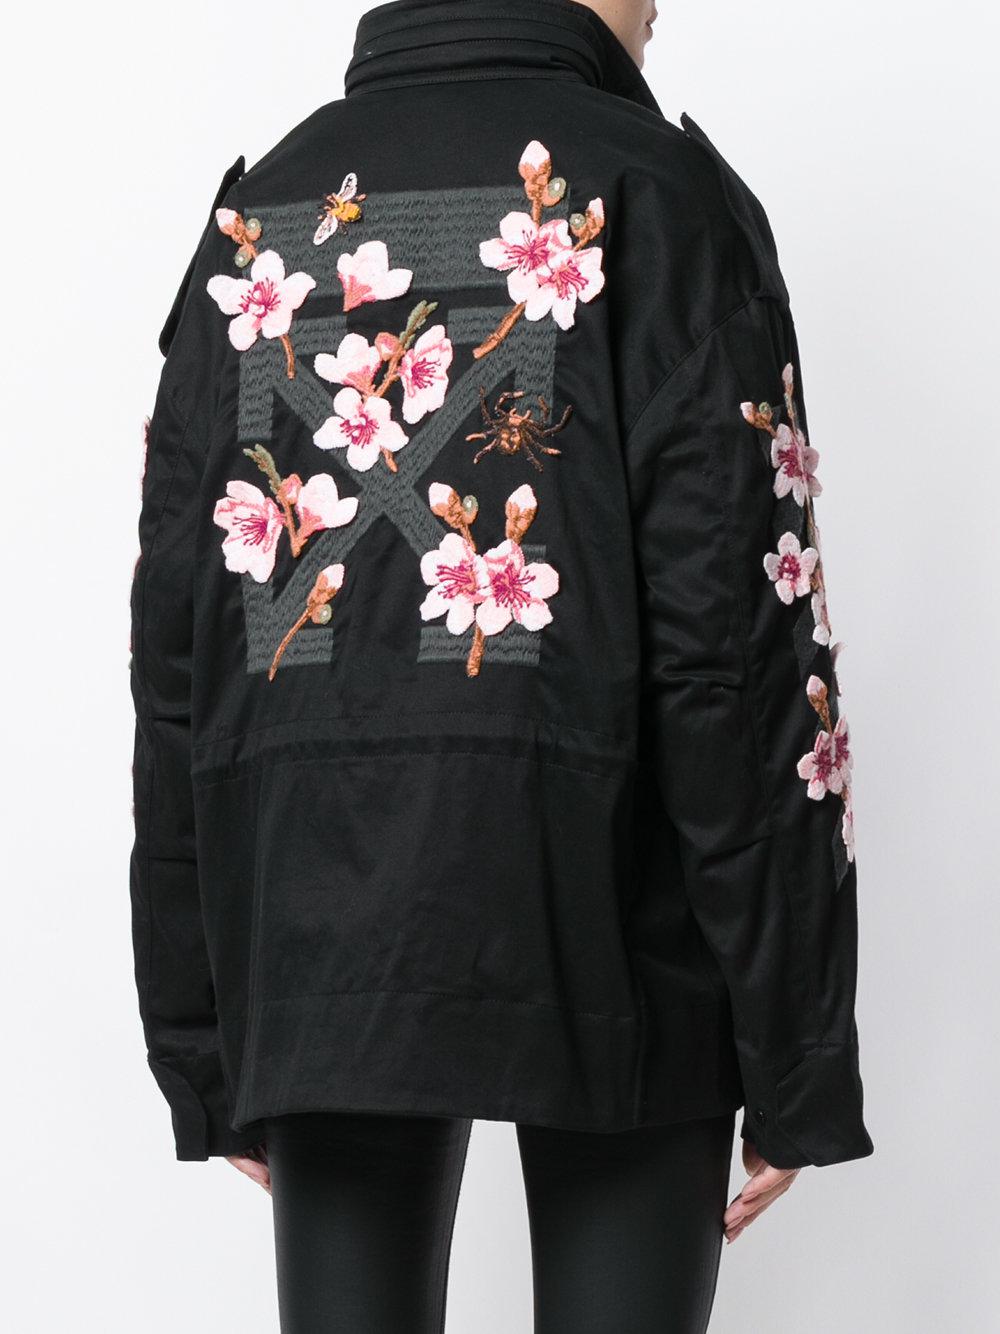 Off-White c/o Virgil Abloh Cotton Flower Embroidered Jacket in Black - Lyst